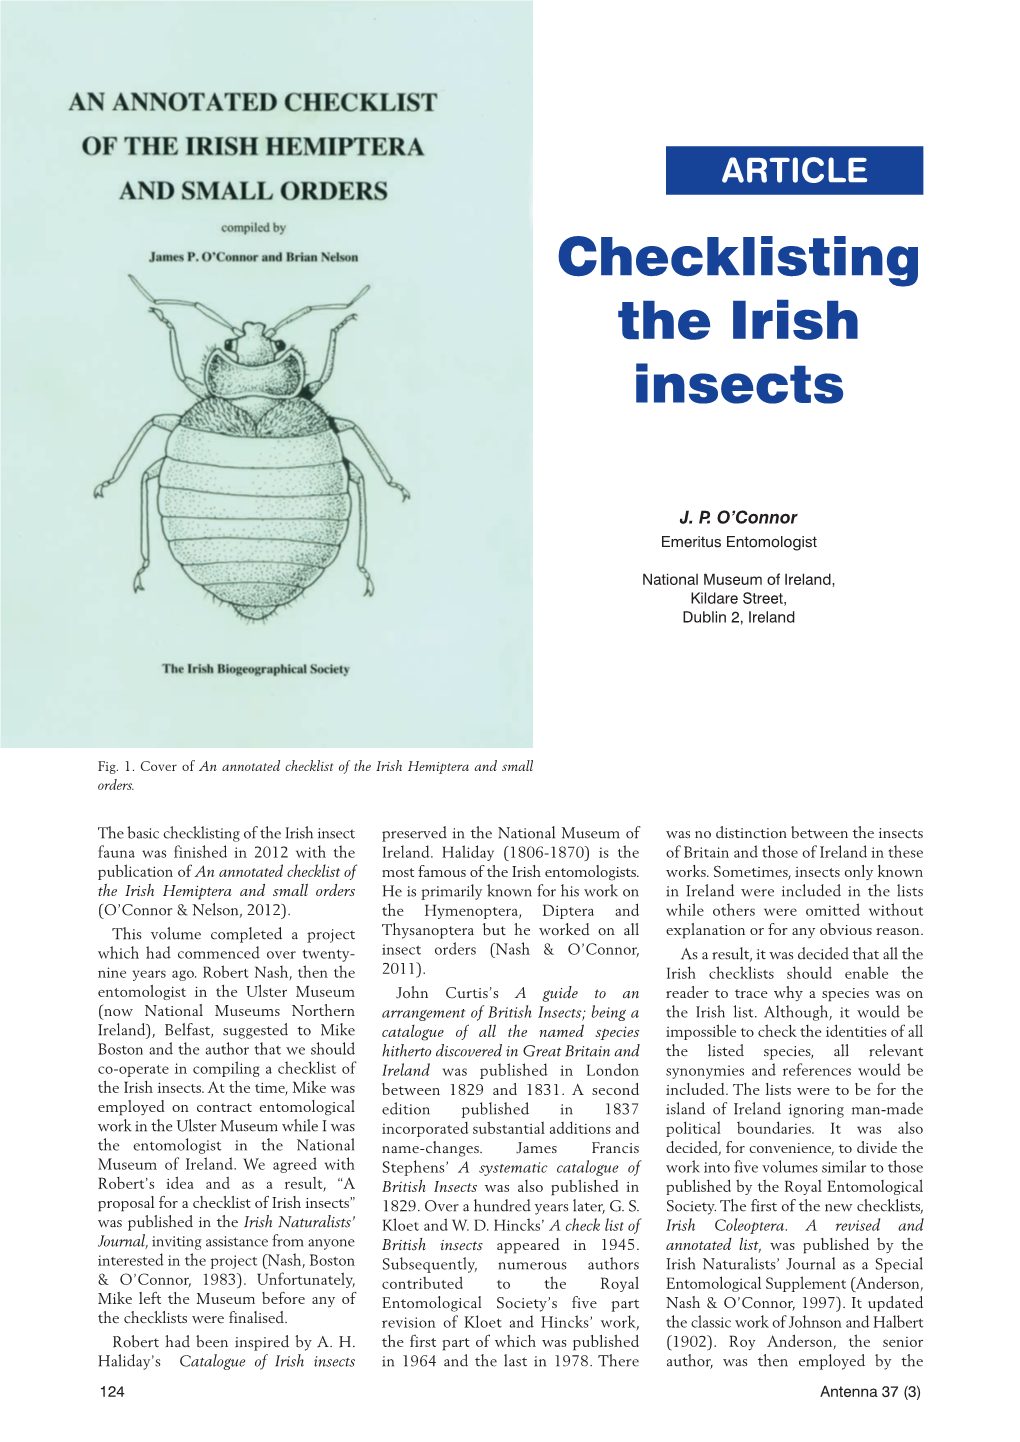 Checklisting the Irish Insects